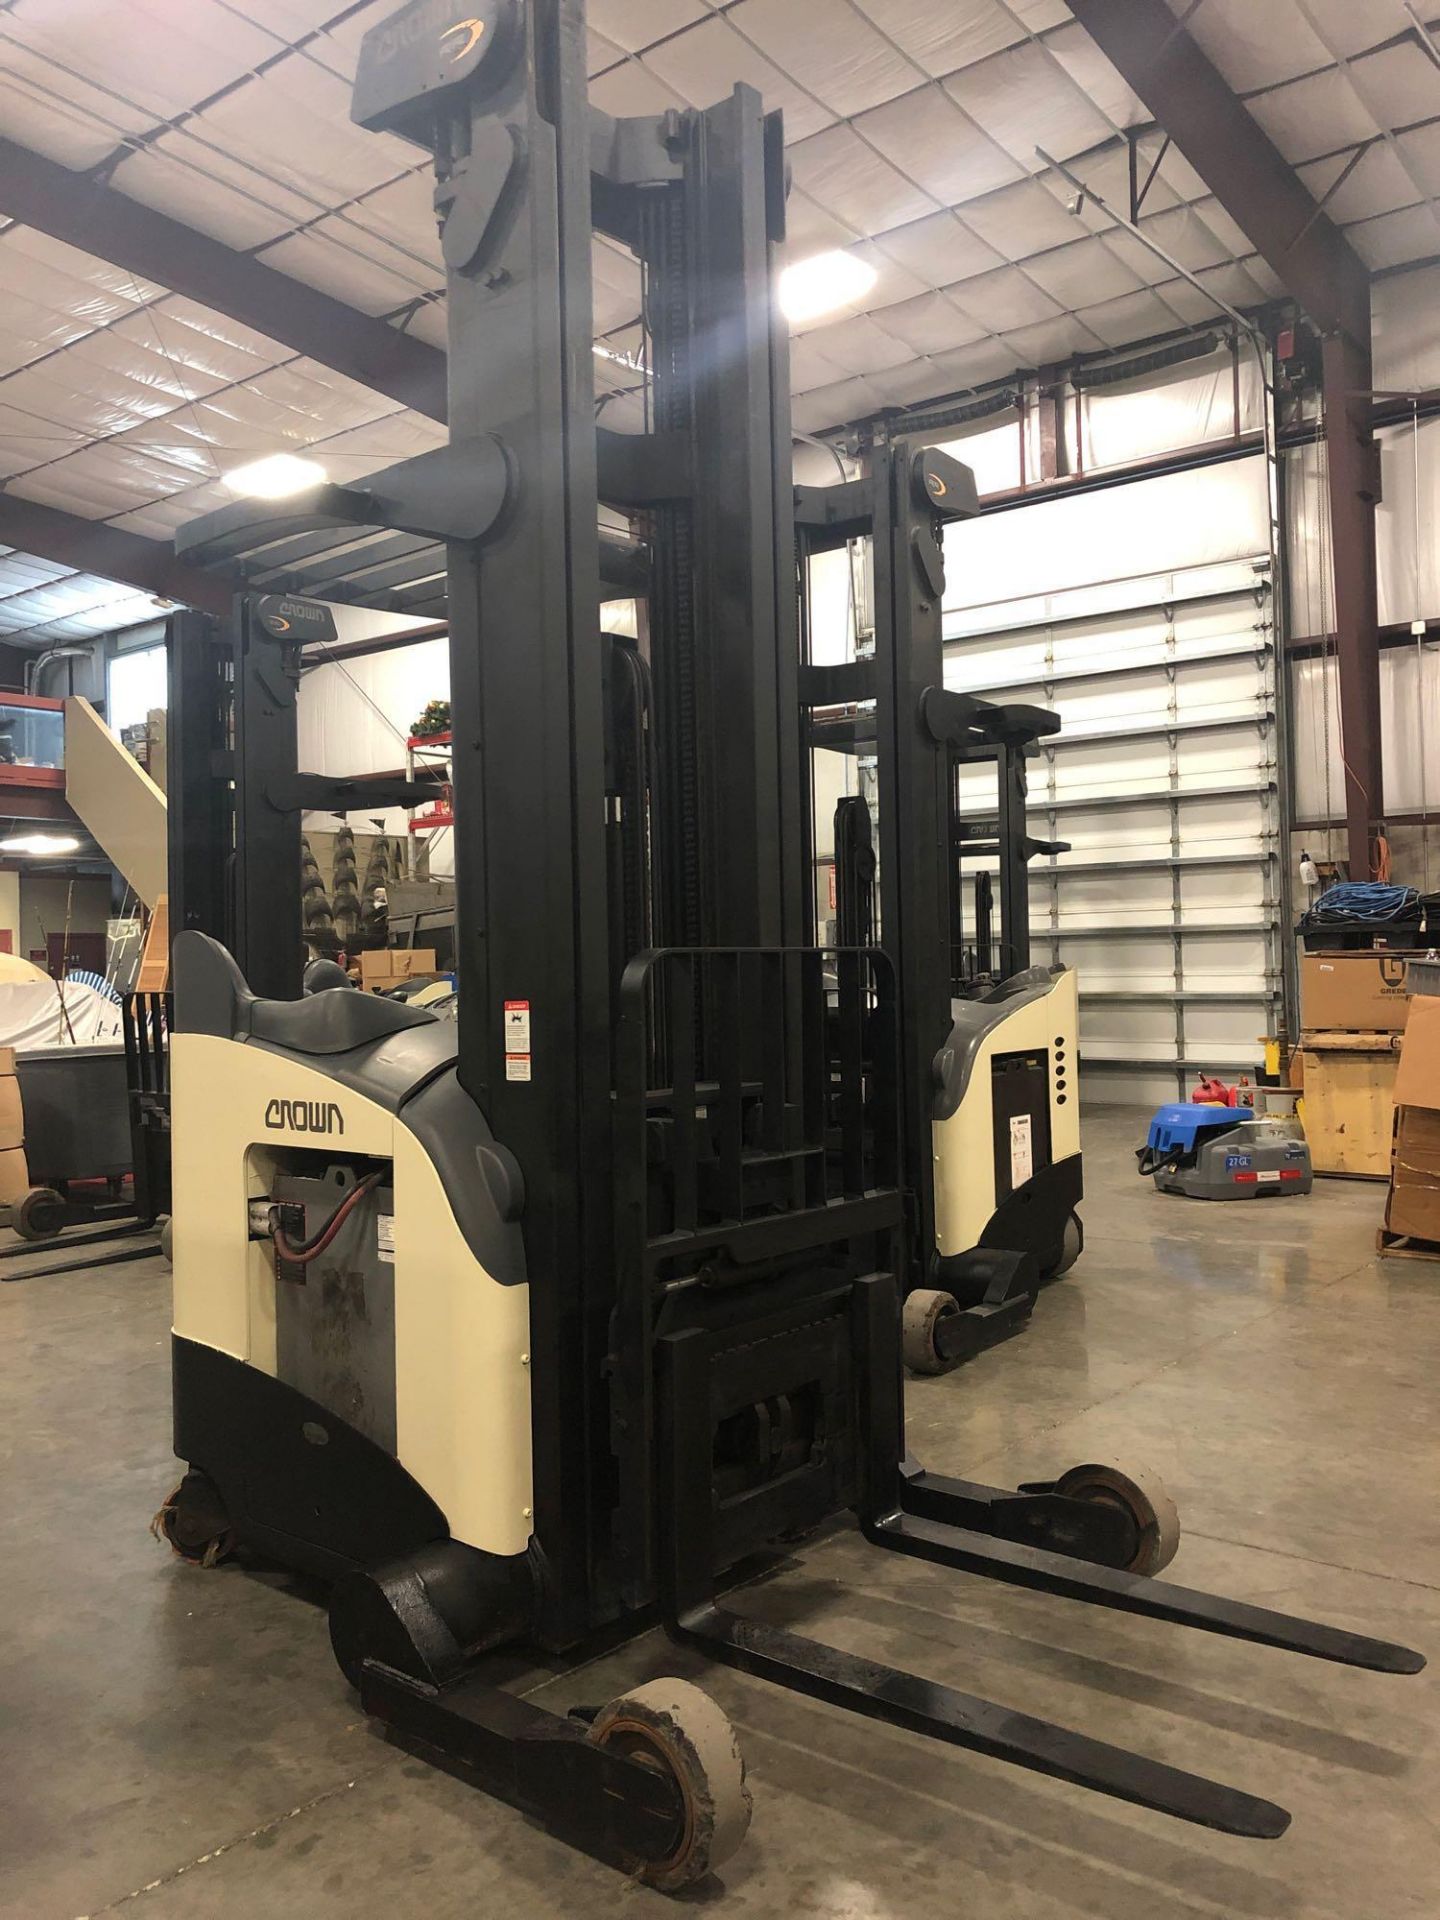 CROWN ELECTRIC REACH FORKLIFT MODEL RR5220-45 RR 5200 SERIES, APPROX. 5,000 LB CAPACITY, 300" HEIGHT